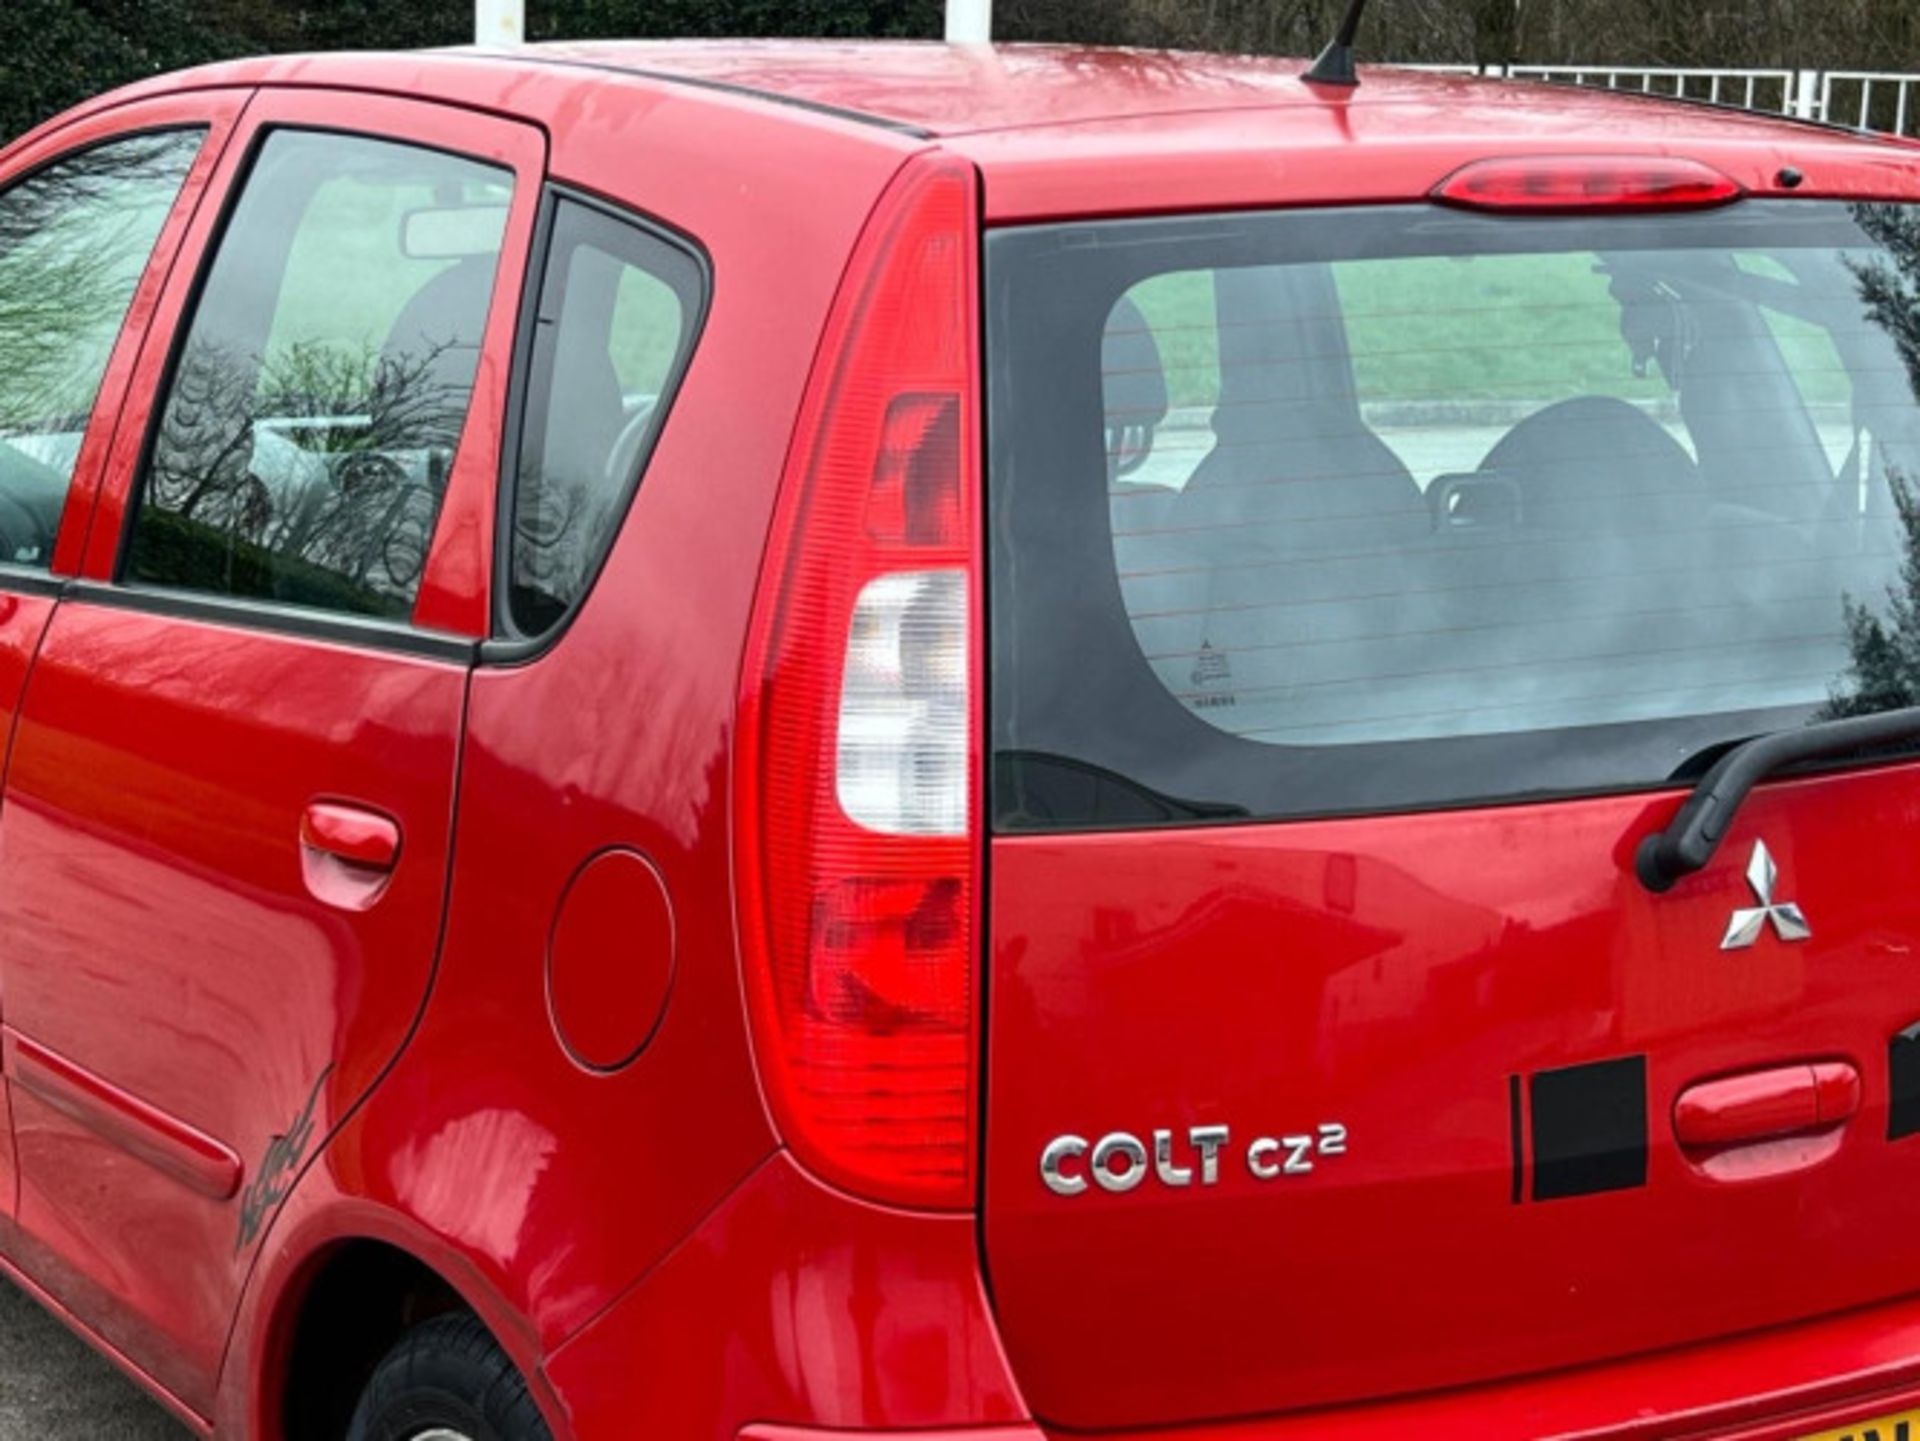 2007 MITSUBISHI COLT 1.5 DI-D DIESEL AUTOMATIC >>--NO VAT ON HAMMER--<< - Image 169 of 191